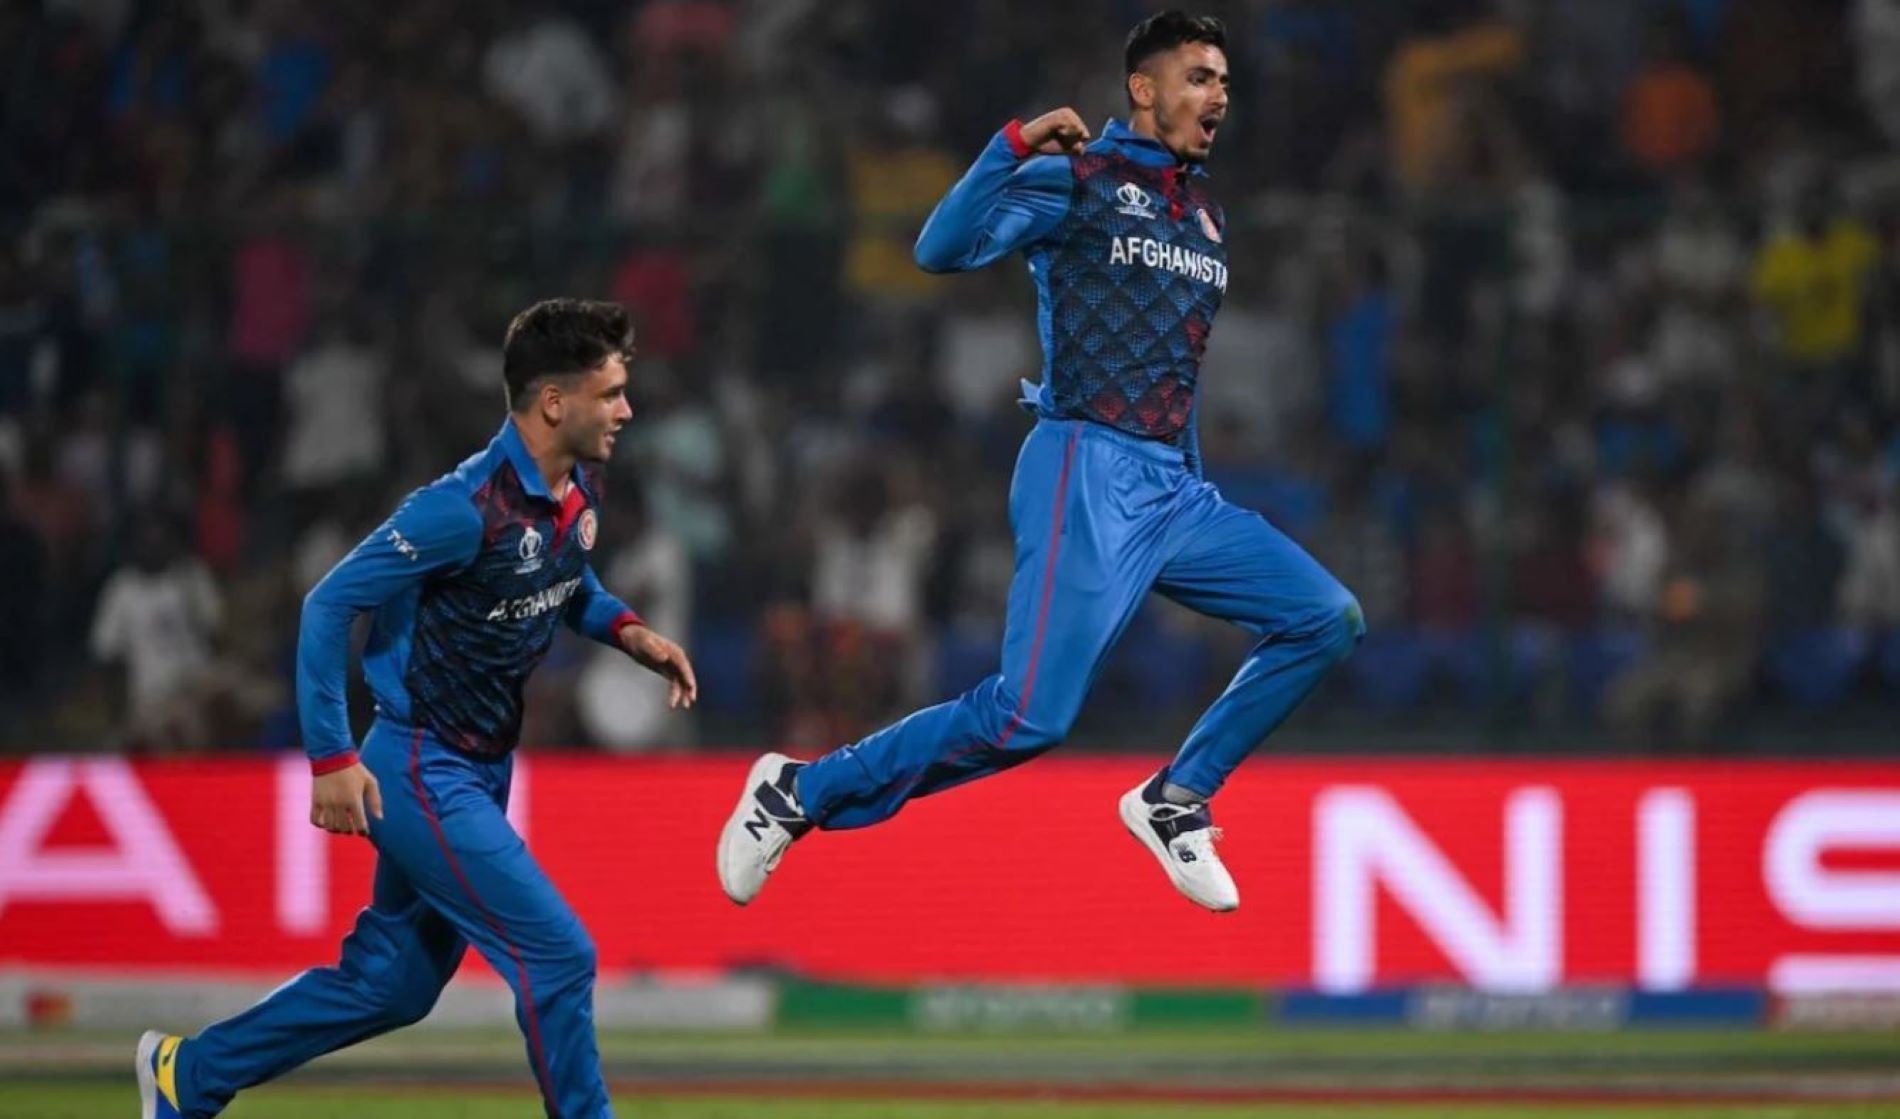 Afghanistan produced one of the biggest World Cup upsets against England